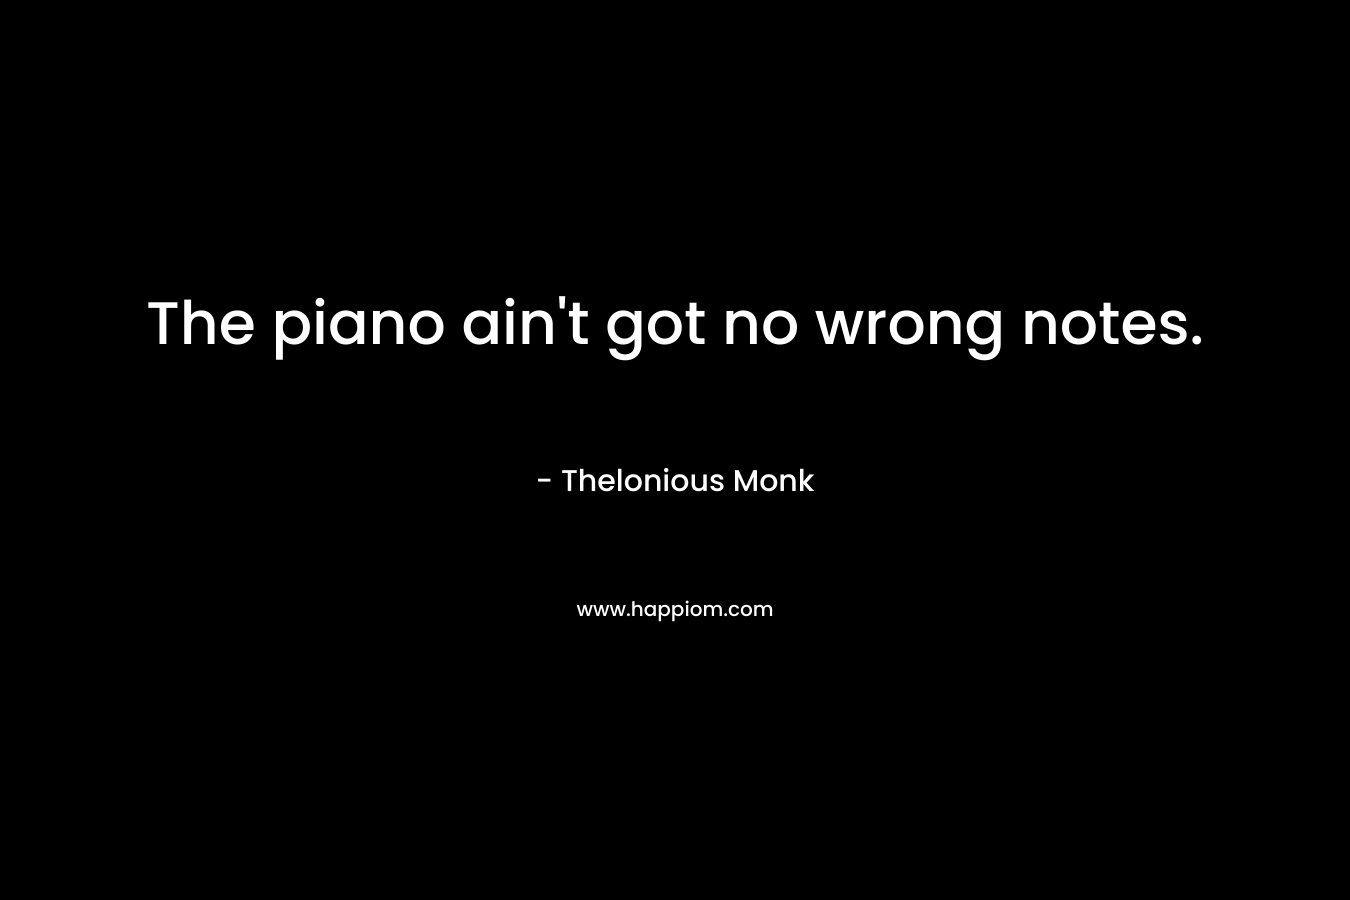 The piano ain't got no wrong notes.